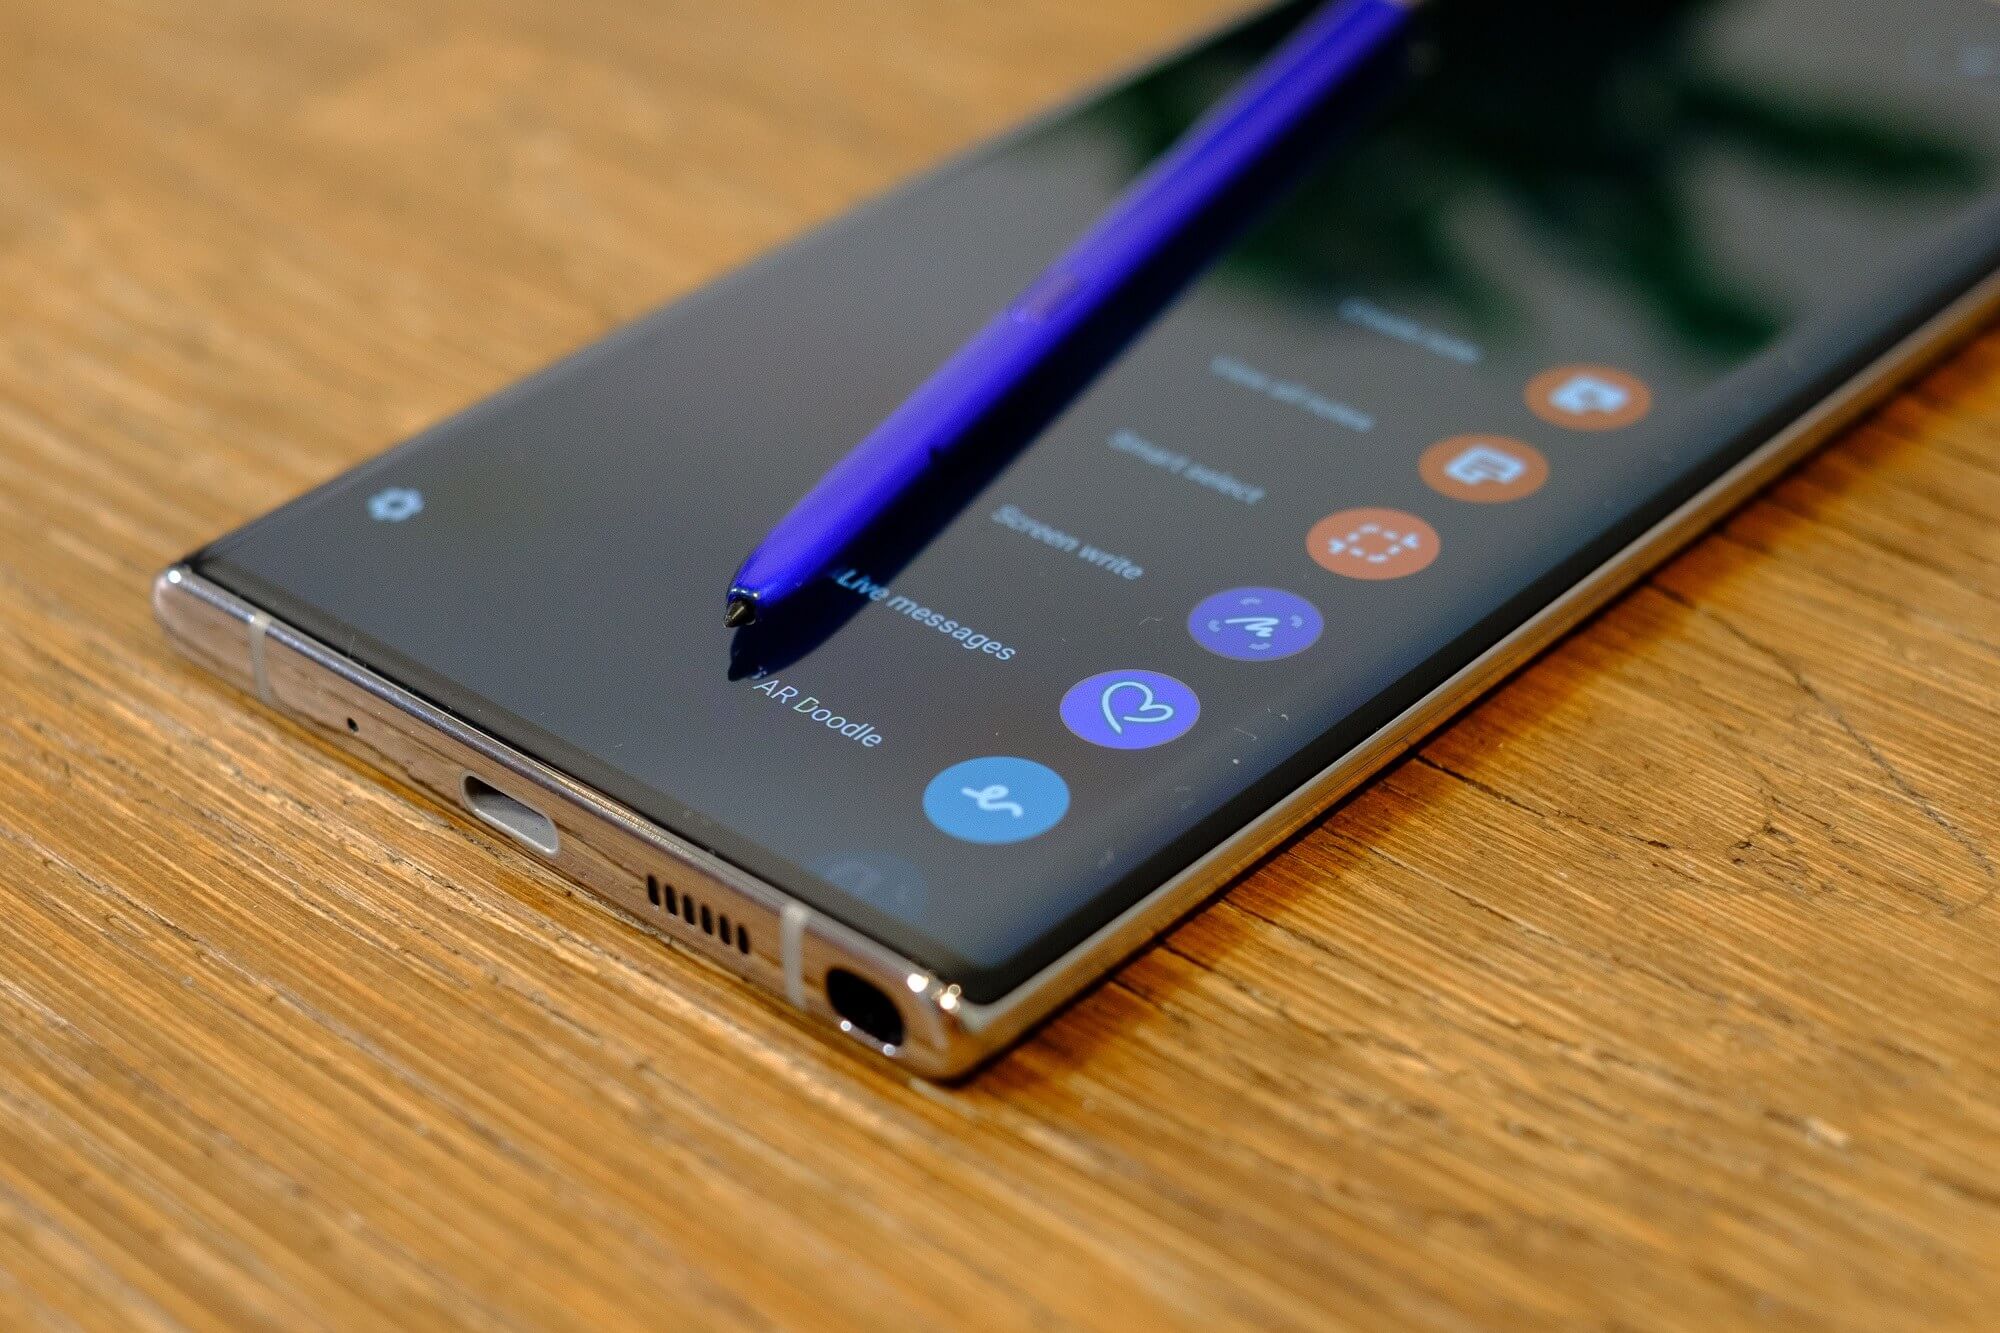 Report: Samsung will unveil the Galaxy Note 20, Fold 2, and new Z Flip on August 5